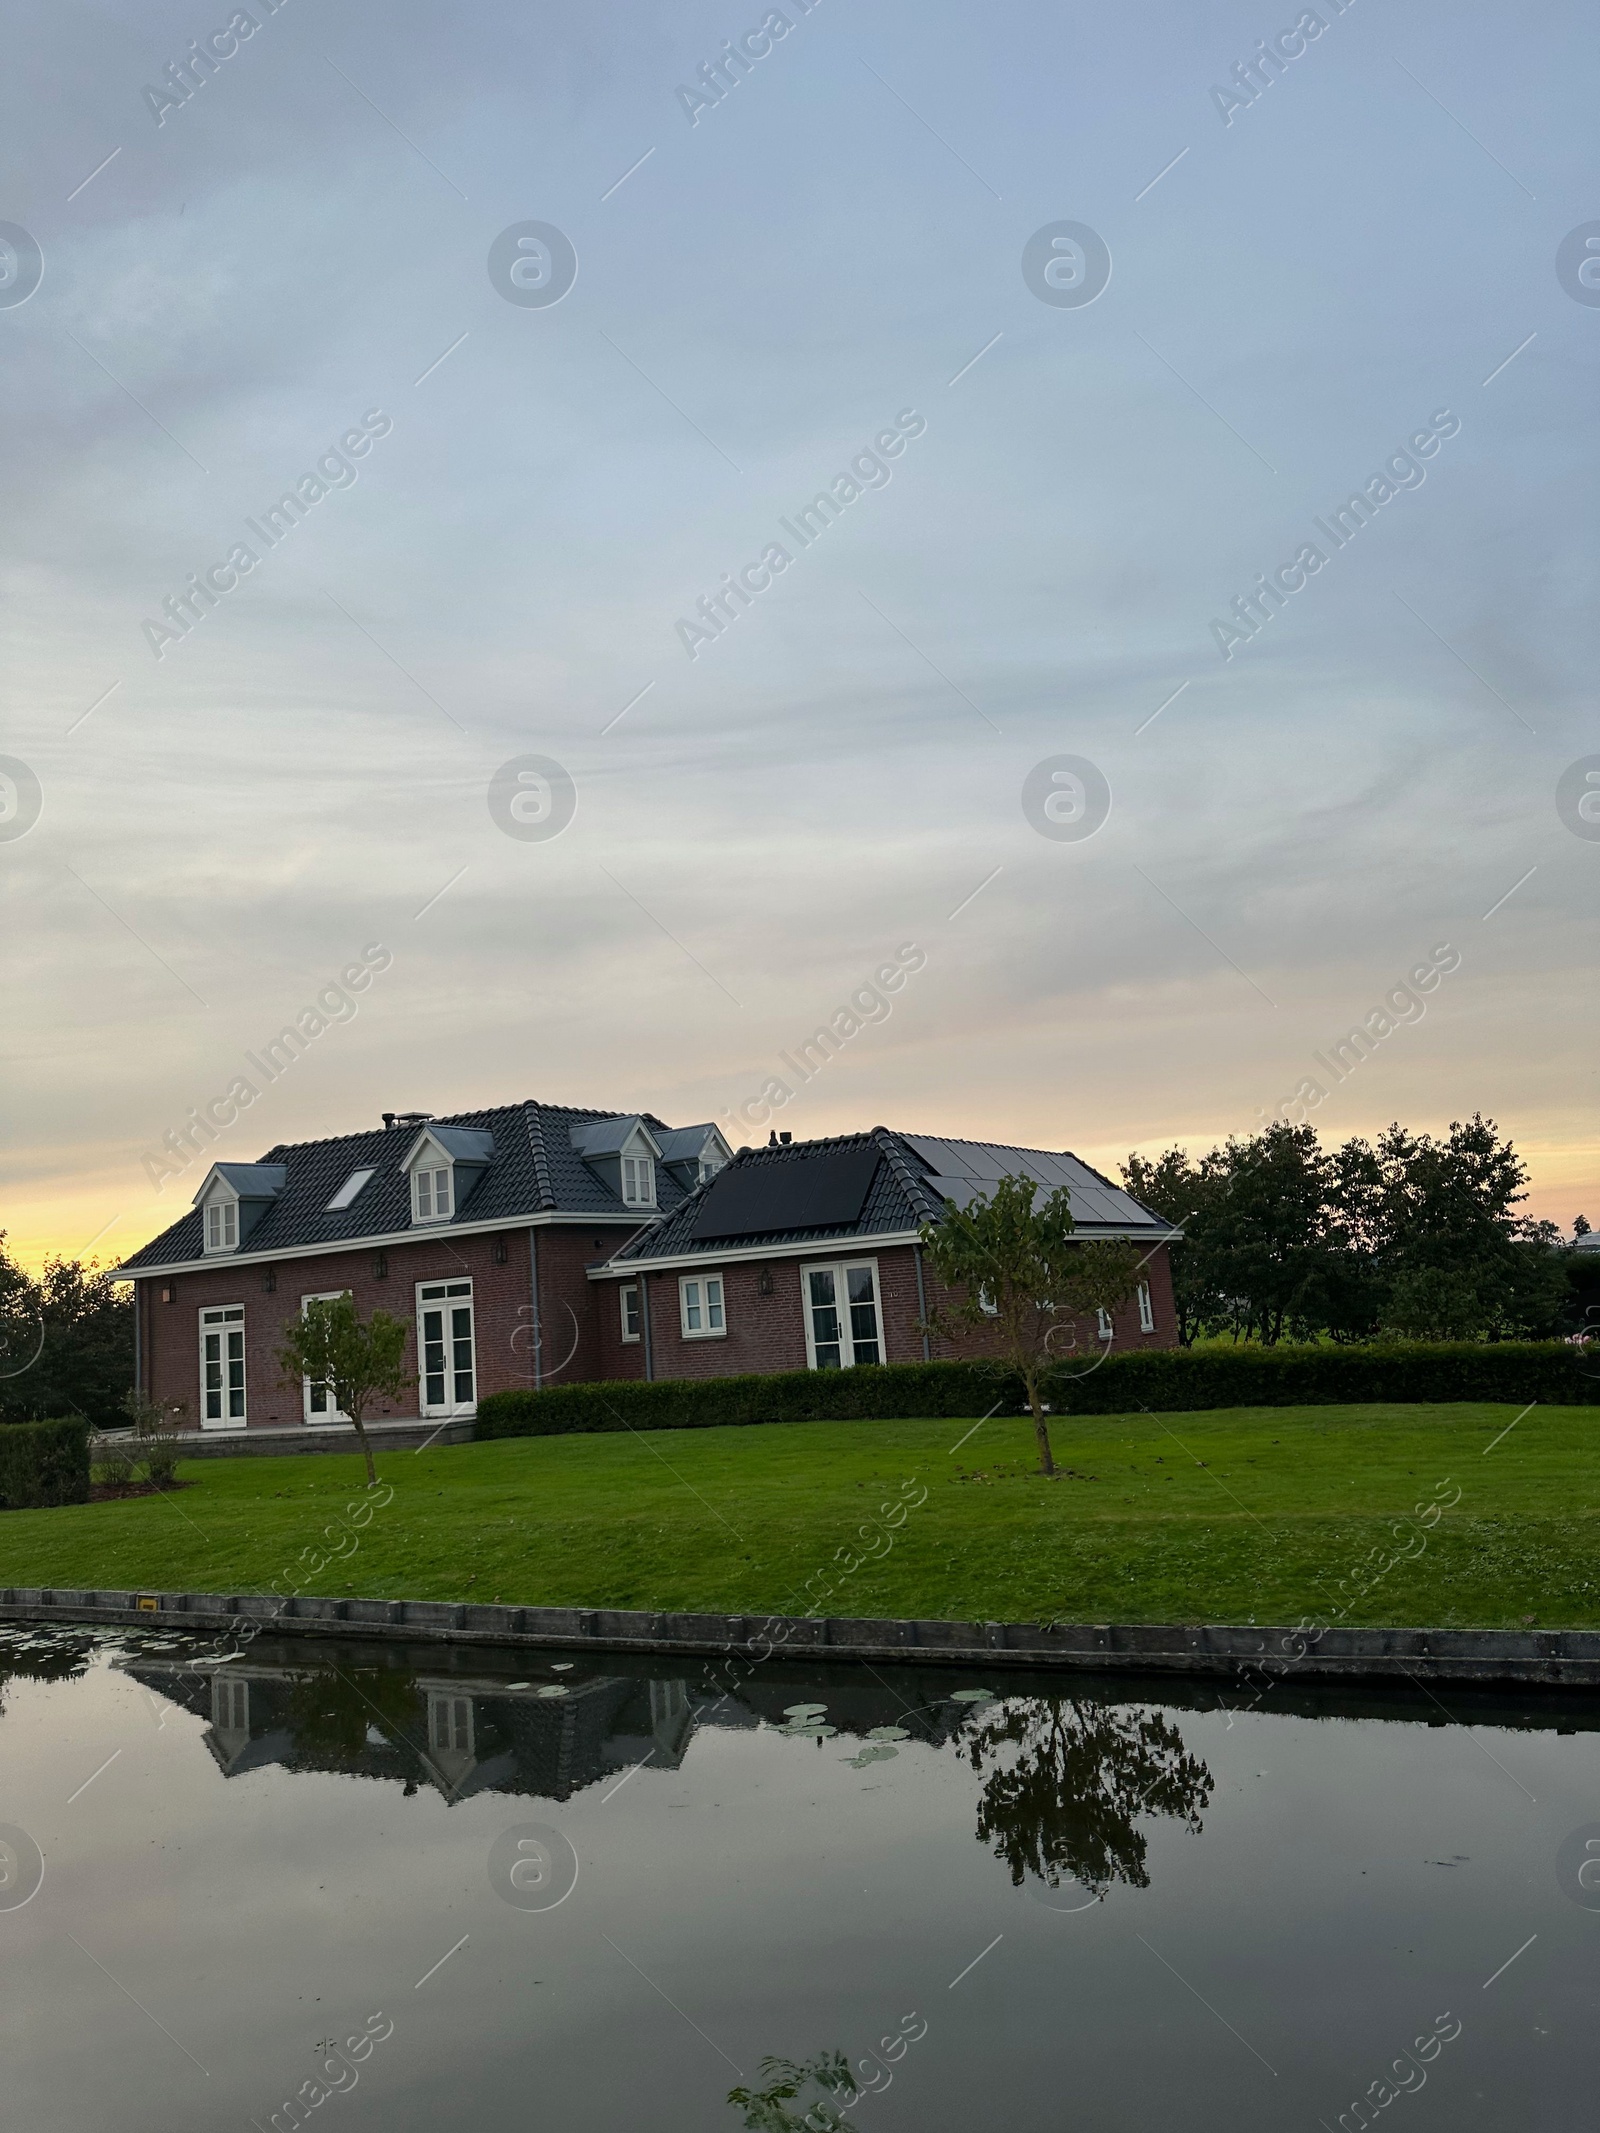 Photo of Buildings, lawn and canal under beautiful sky